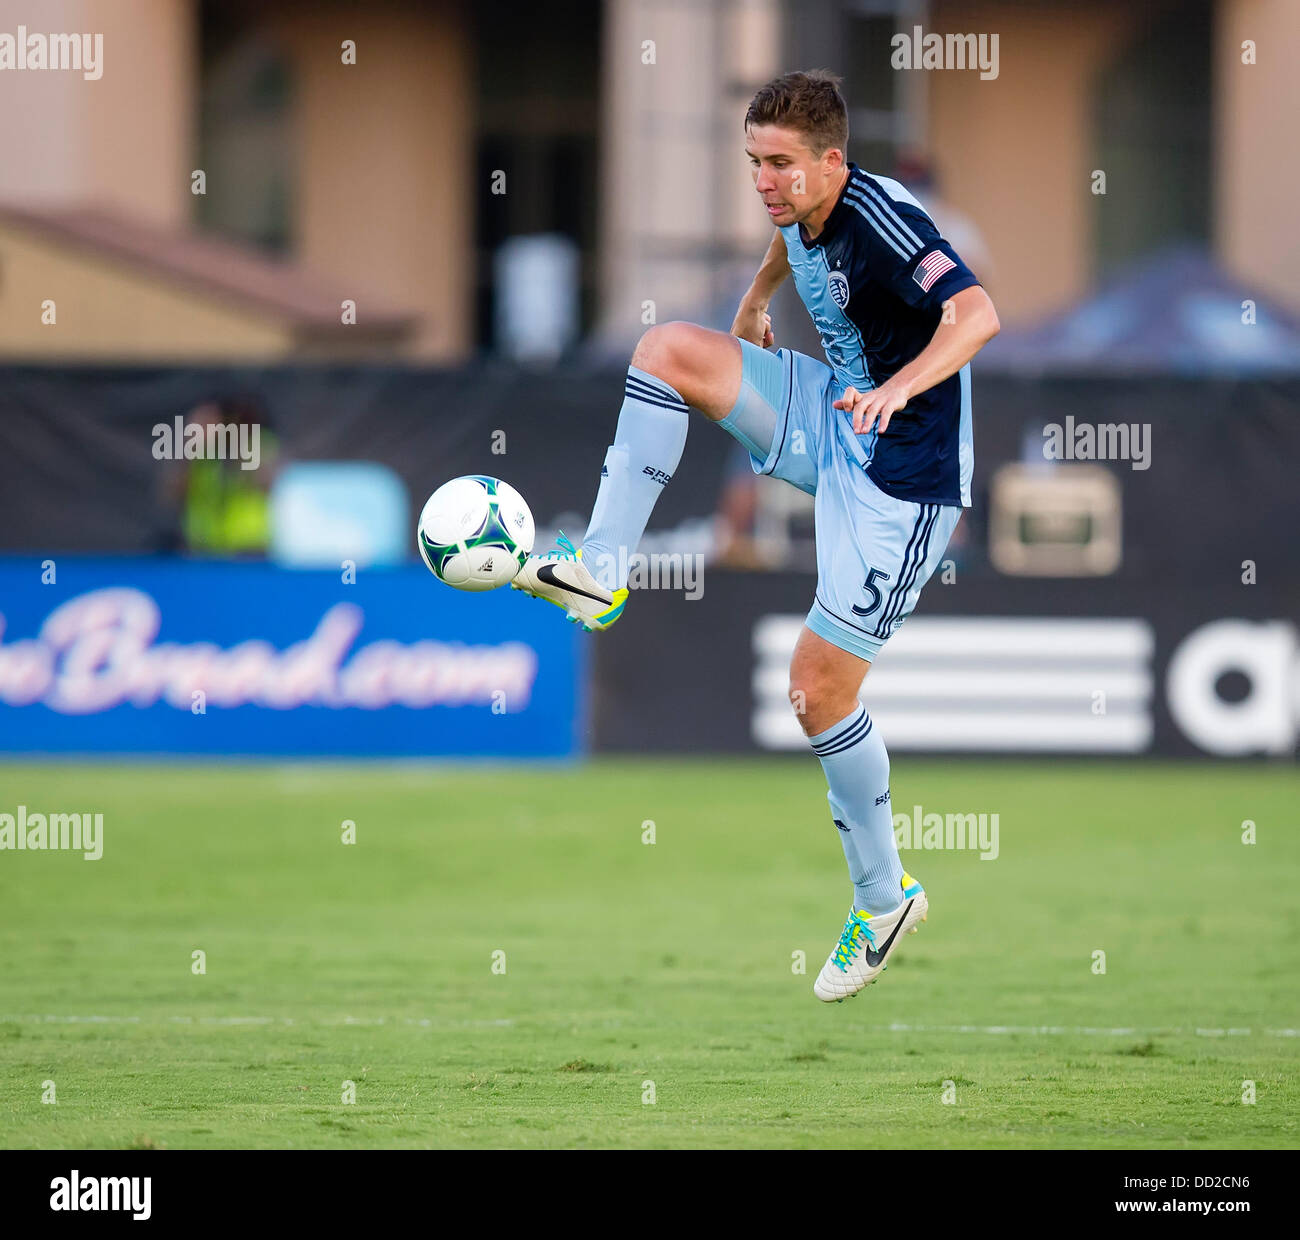 August 18, 2013: Sporting KC defender Matt Besler (5) in action during the MLS soccer game between the San Jose Earthquakes and Sporting Kansas City at Buck Shaw Stadium in Santa Clara, CA. The Earthquakes defeated Kansas City 1-0. Stock Photo